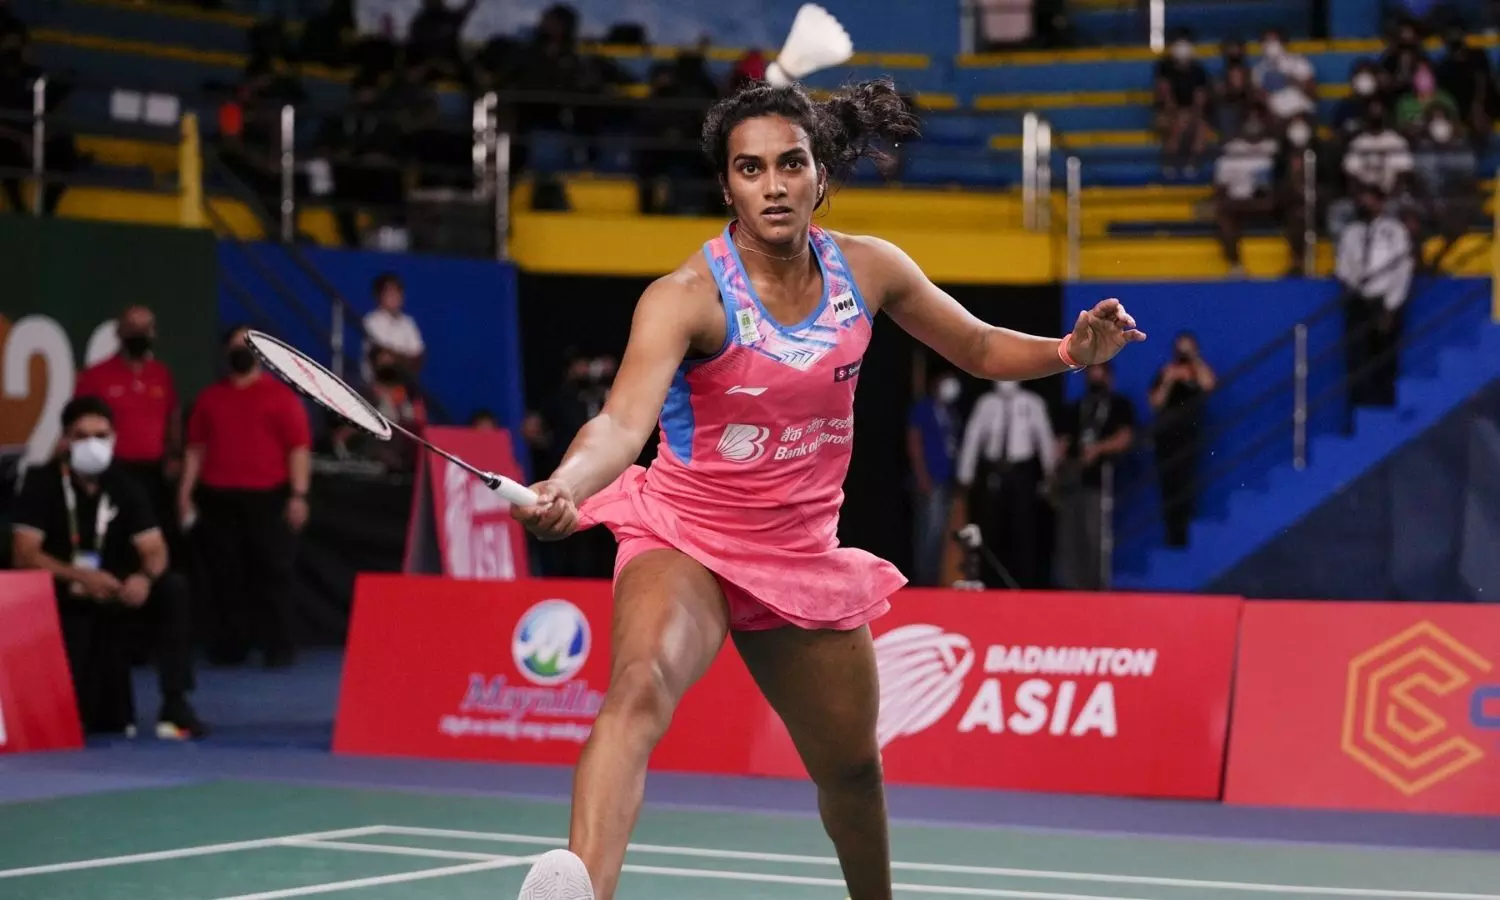 Indonesia Open 2022 Sindhu, Lakshya to lead medal hunt — Preview, Indian squad, Where to Watch, Live Stream